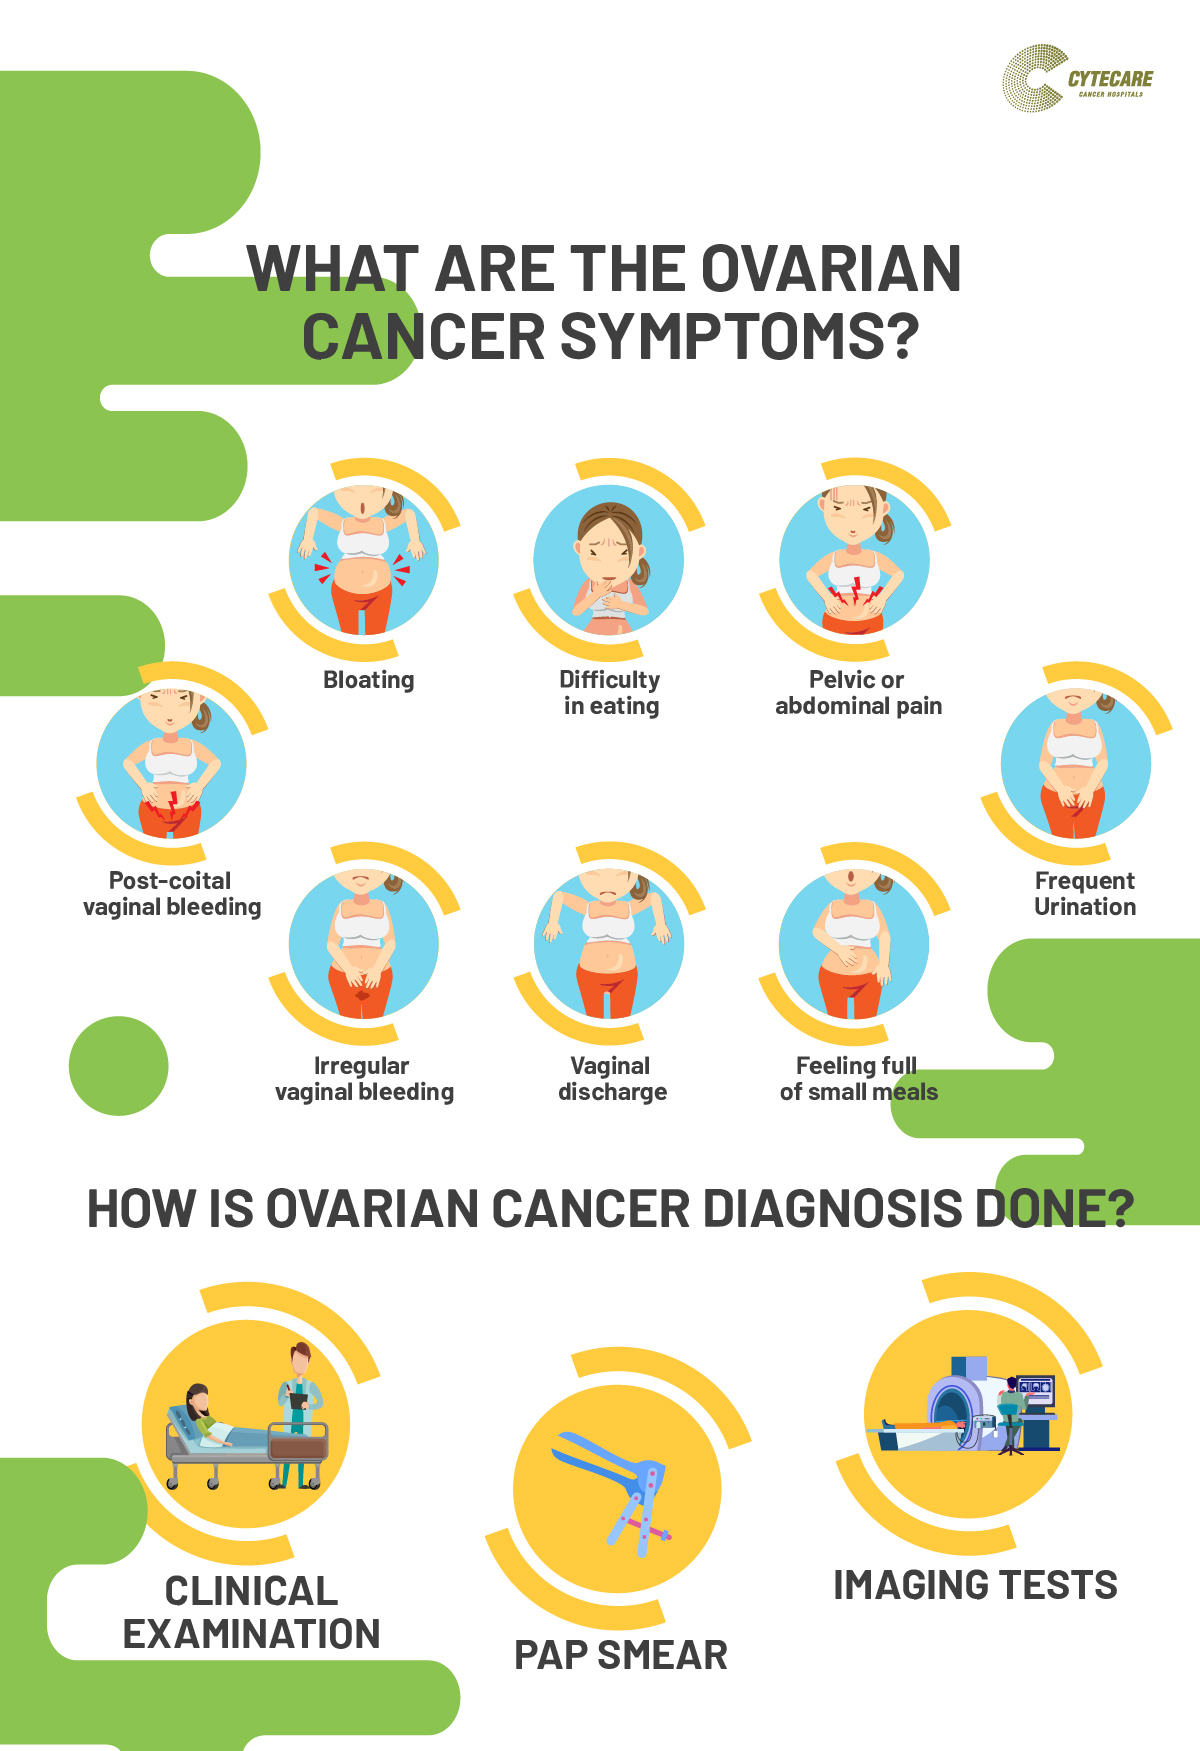 Ovarian cancer or cyst symptoms. Cancer in ovarian cysts Ovarian cancer or cysts